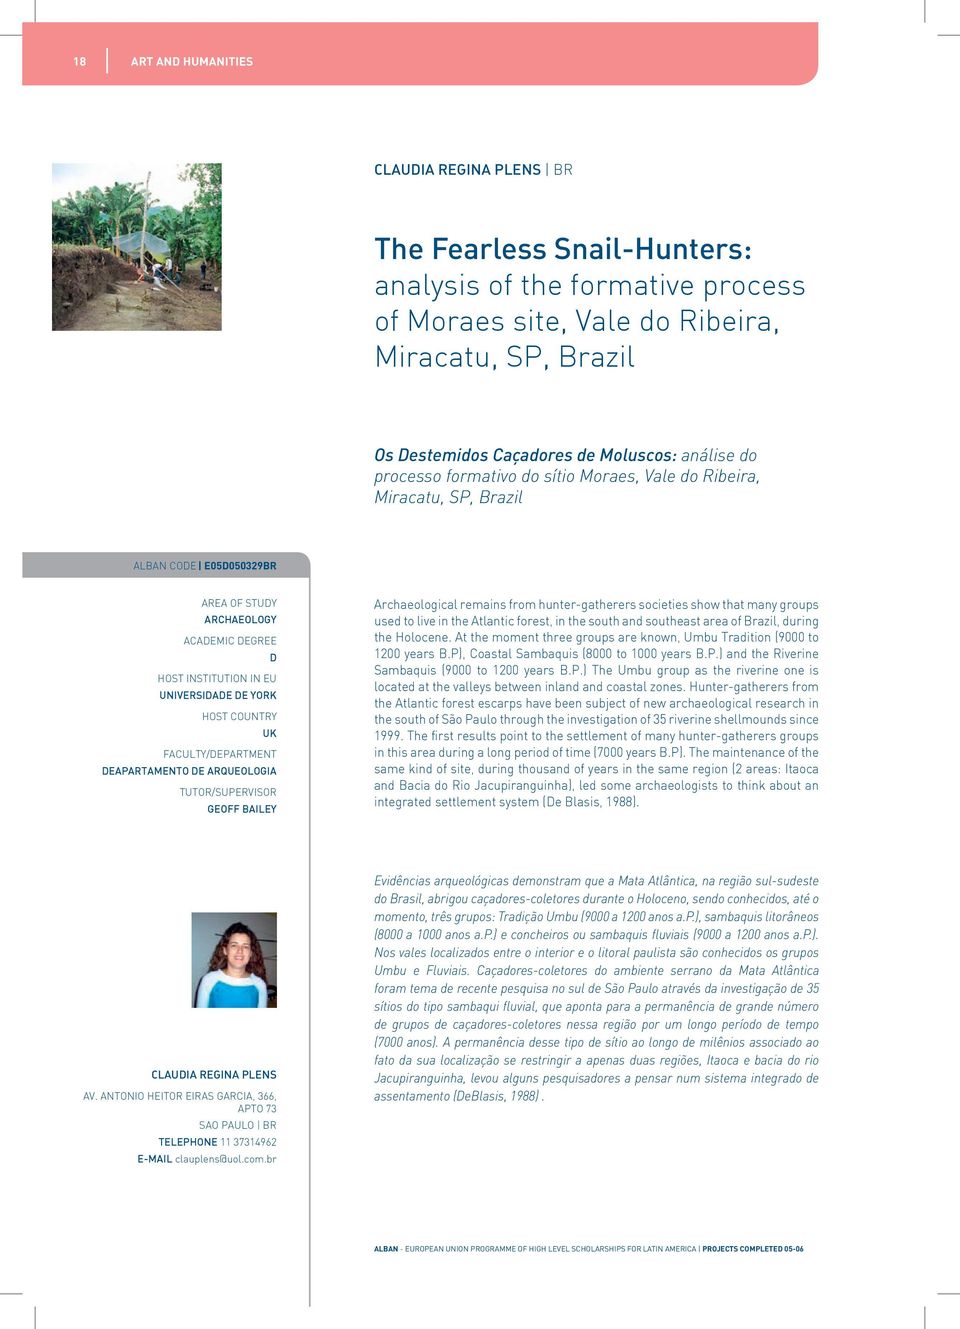 Archaeological remains from hunter-gatherers societies show that many groups used to live in the Atlantic forest, in the south and southeast area of Brazil, during the Holocene.